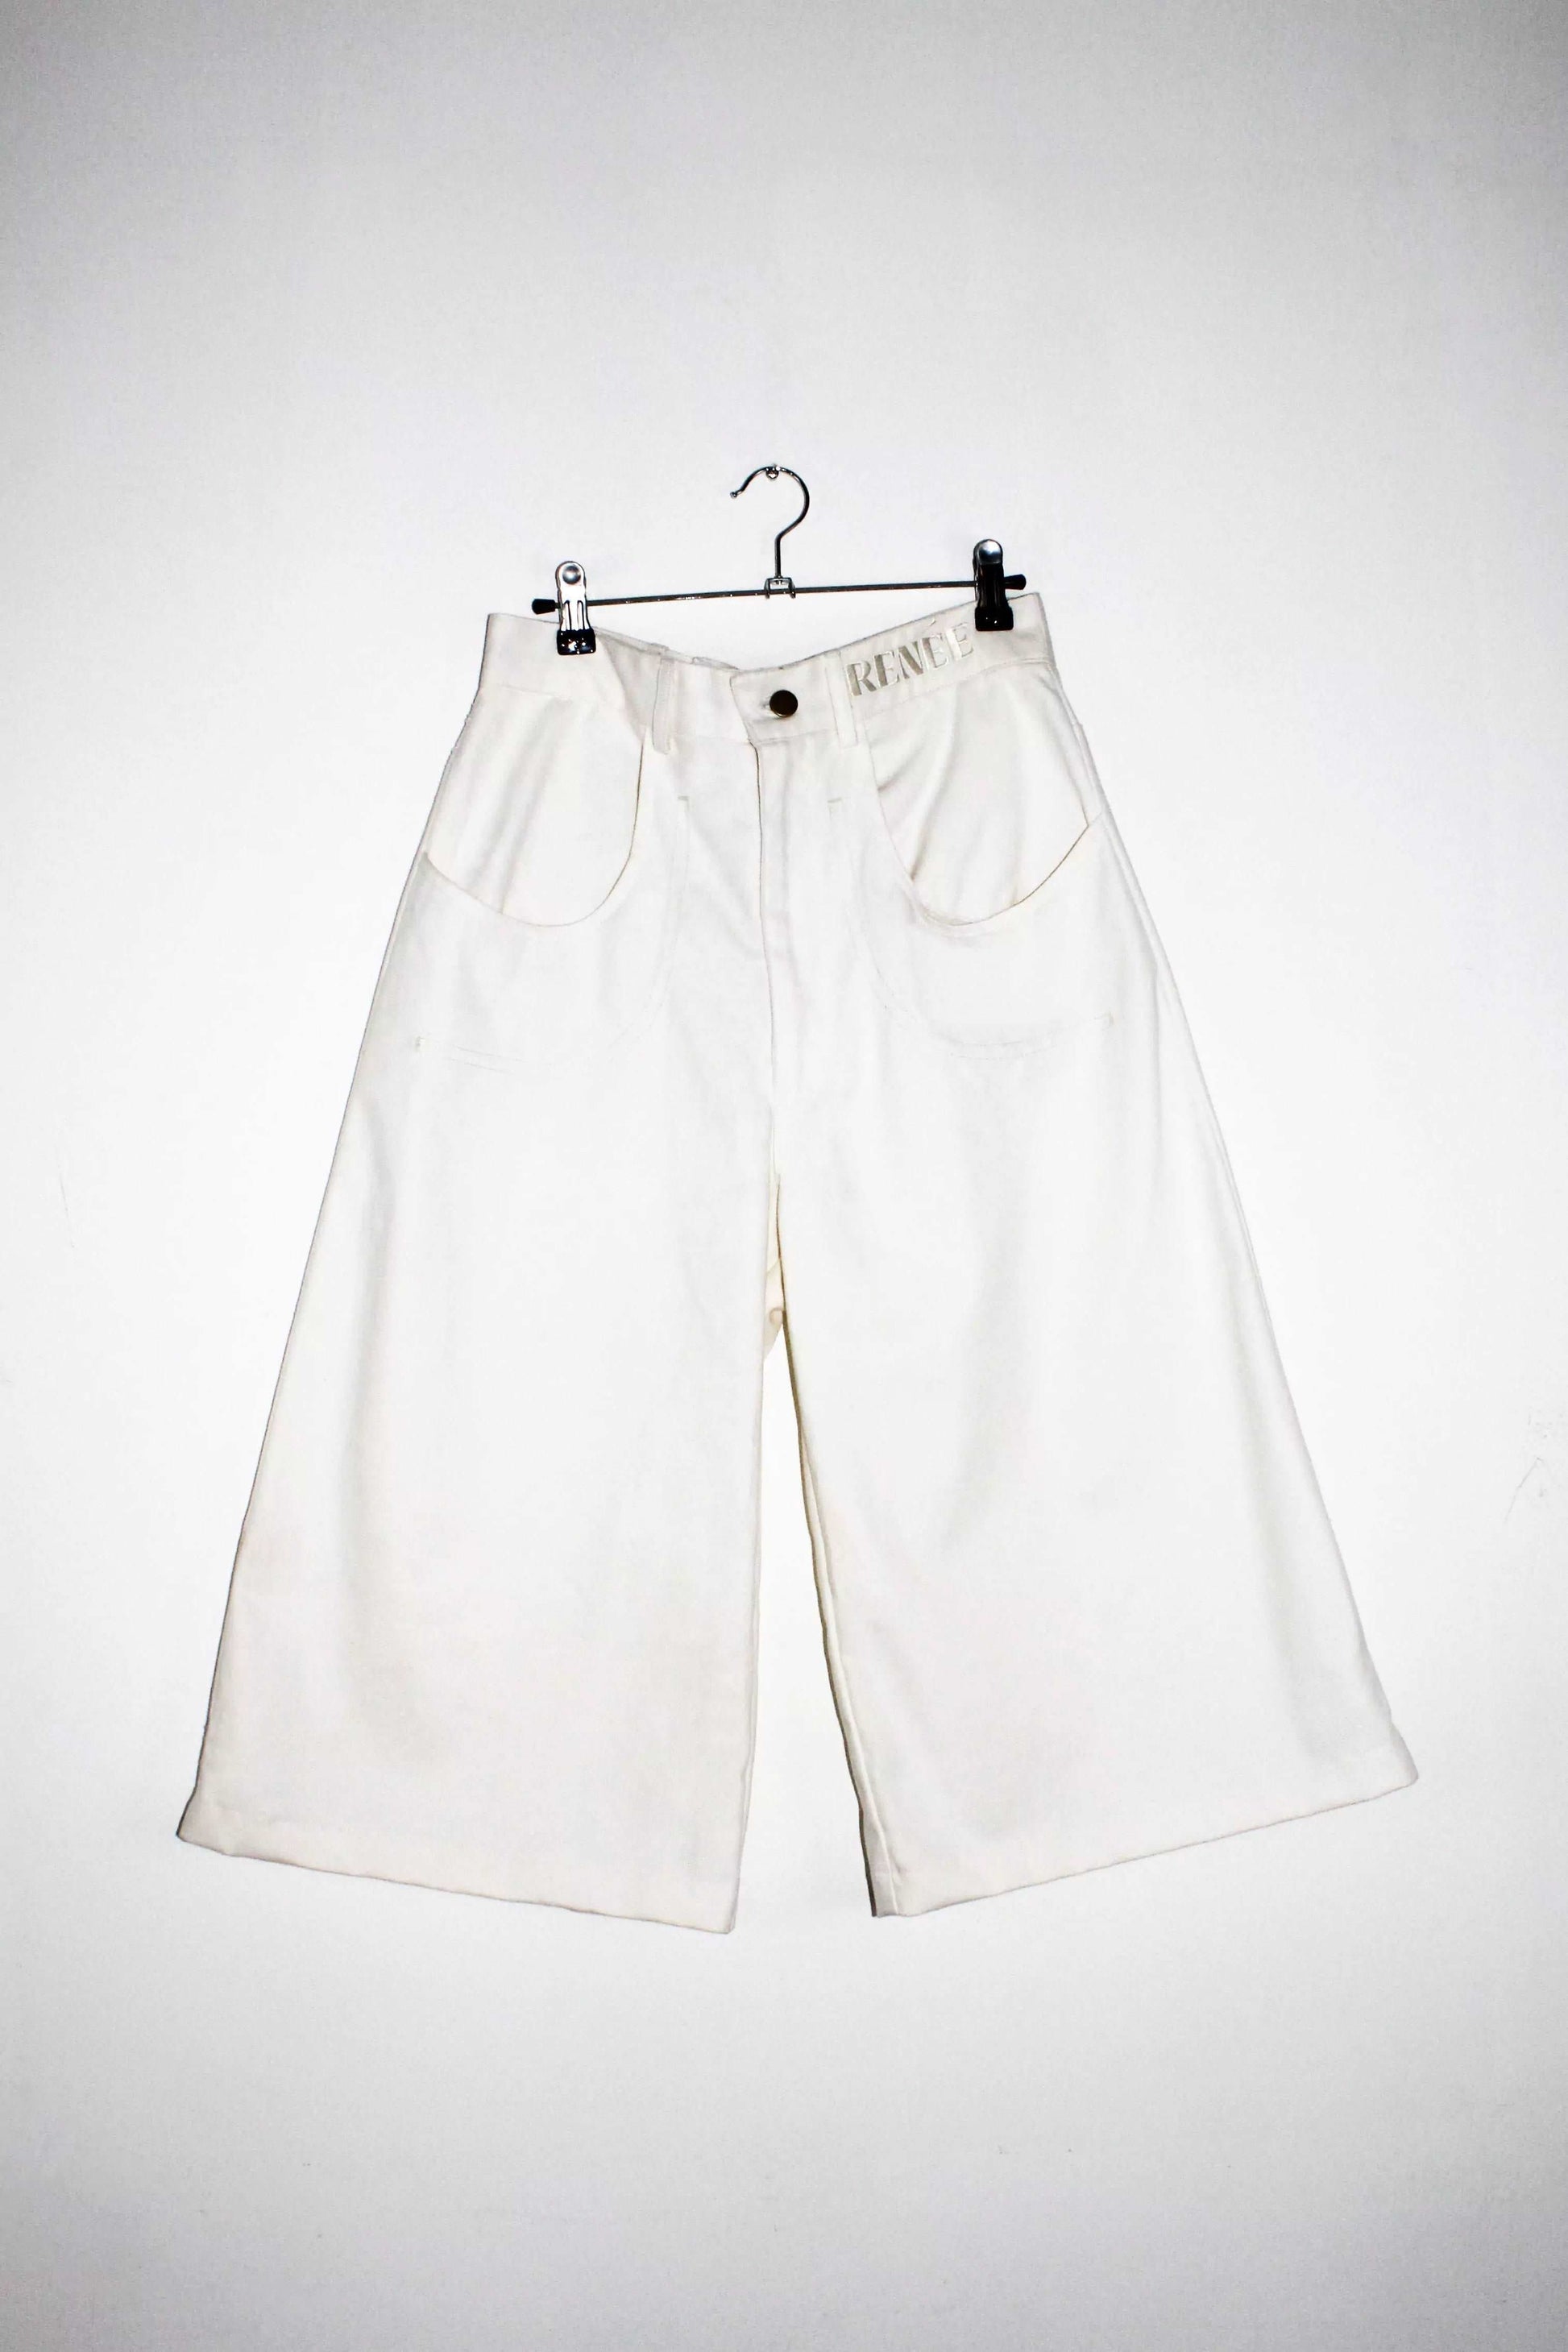 Front view lightweight long white denim shorts with removable screw buttons. Has fitted waist and 90s vintage details